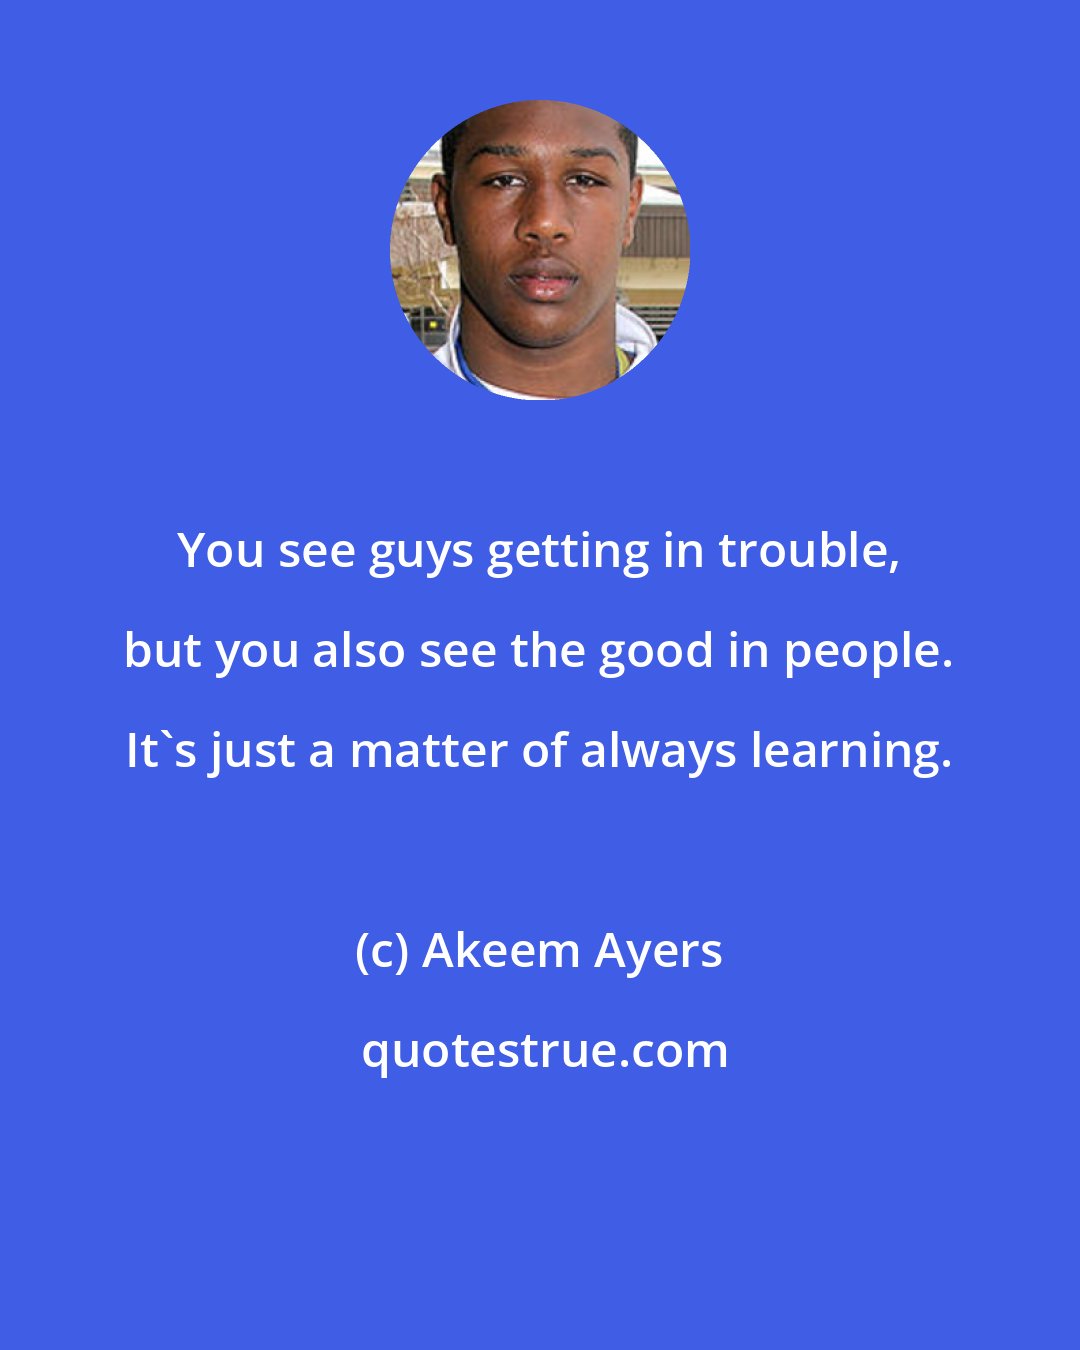 Akeem Ayers: You see guys getting in trouble, but you also see the good in people. It's just a matter of always learning.